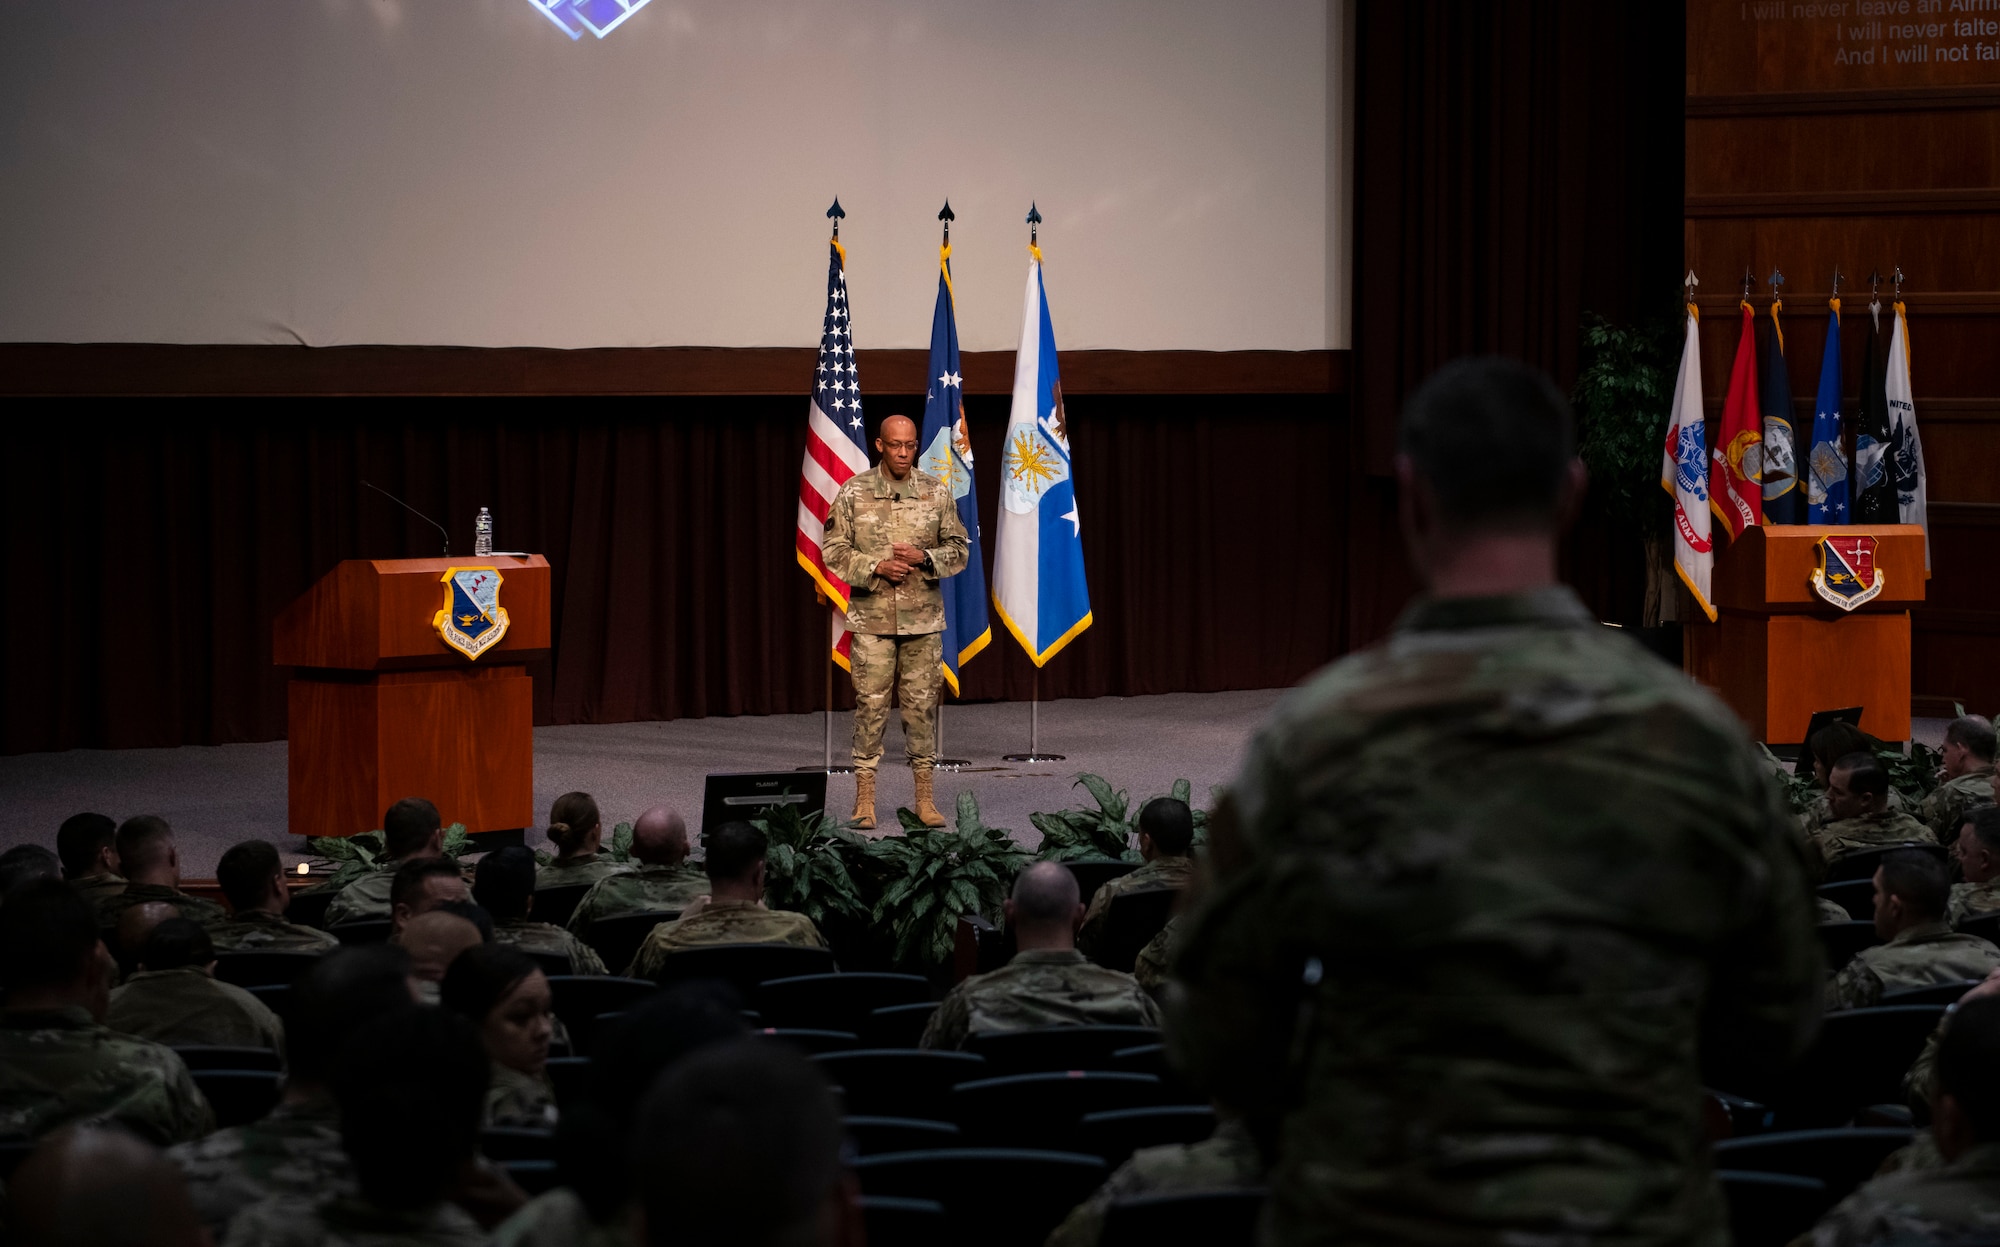 Air Force Chief of Staff Gen. CQ Brown, Jr. speaks on stage at the Air Force Senior Noncommissioned Officer Academy, March 10, 2022, while a student stands to ask a question, joined by many of the Airman's peers.